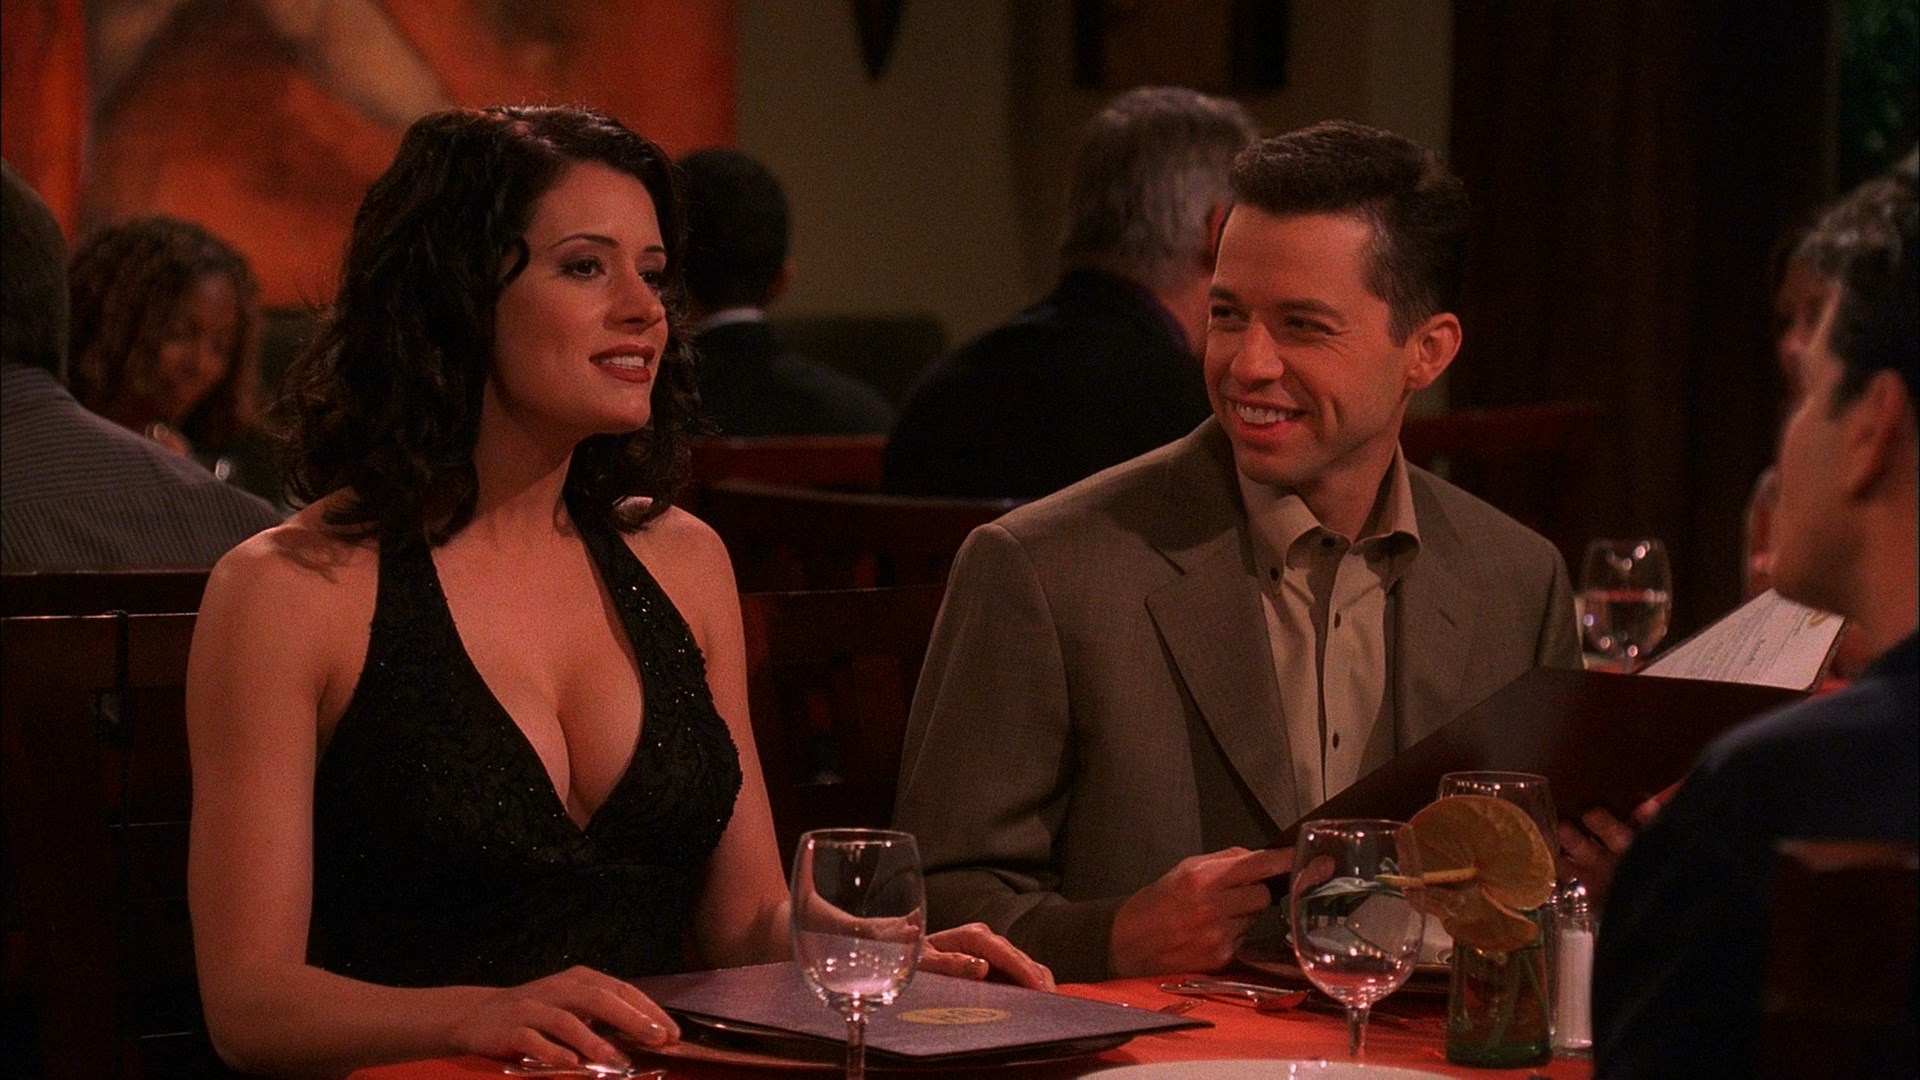 Paget Brewster, Jeri Ryan, Marin Hinkle -Two And a Half Men S2 - 1080p. 